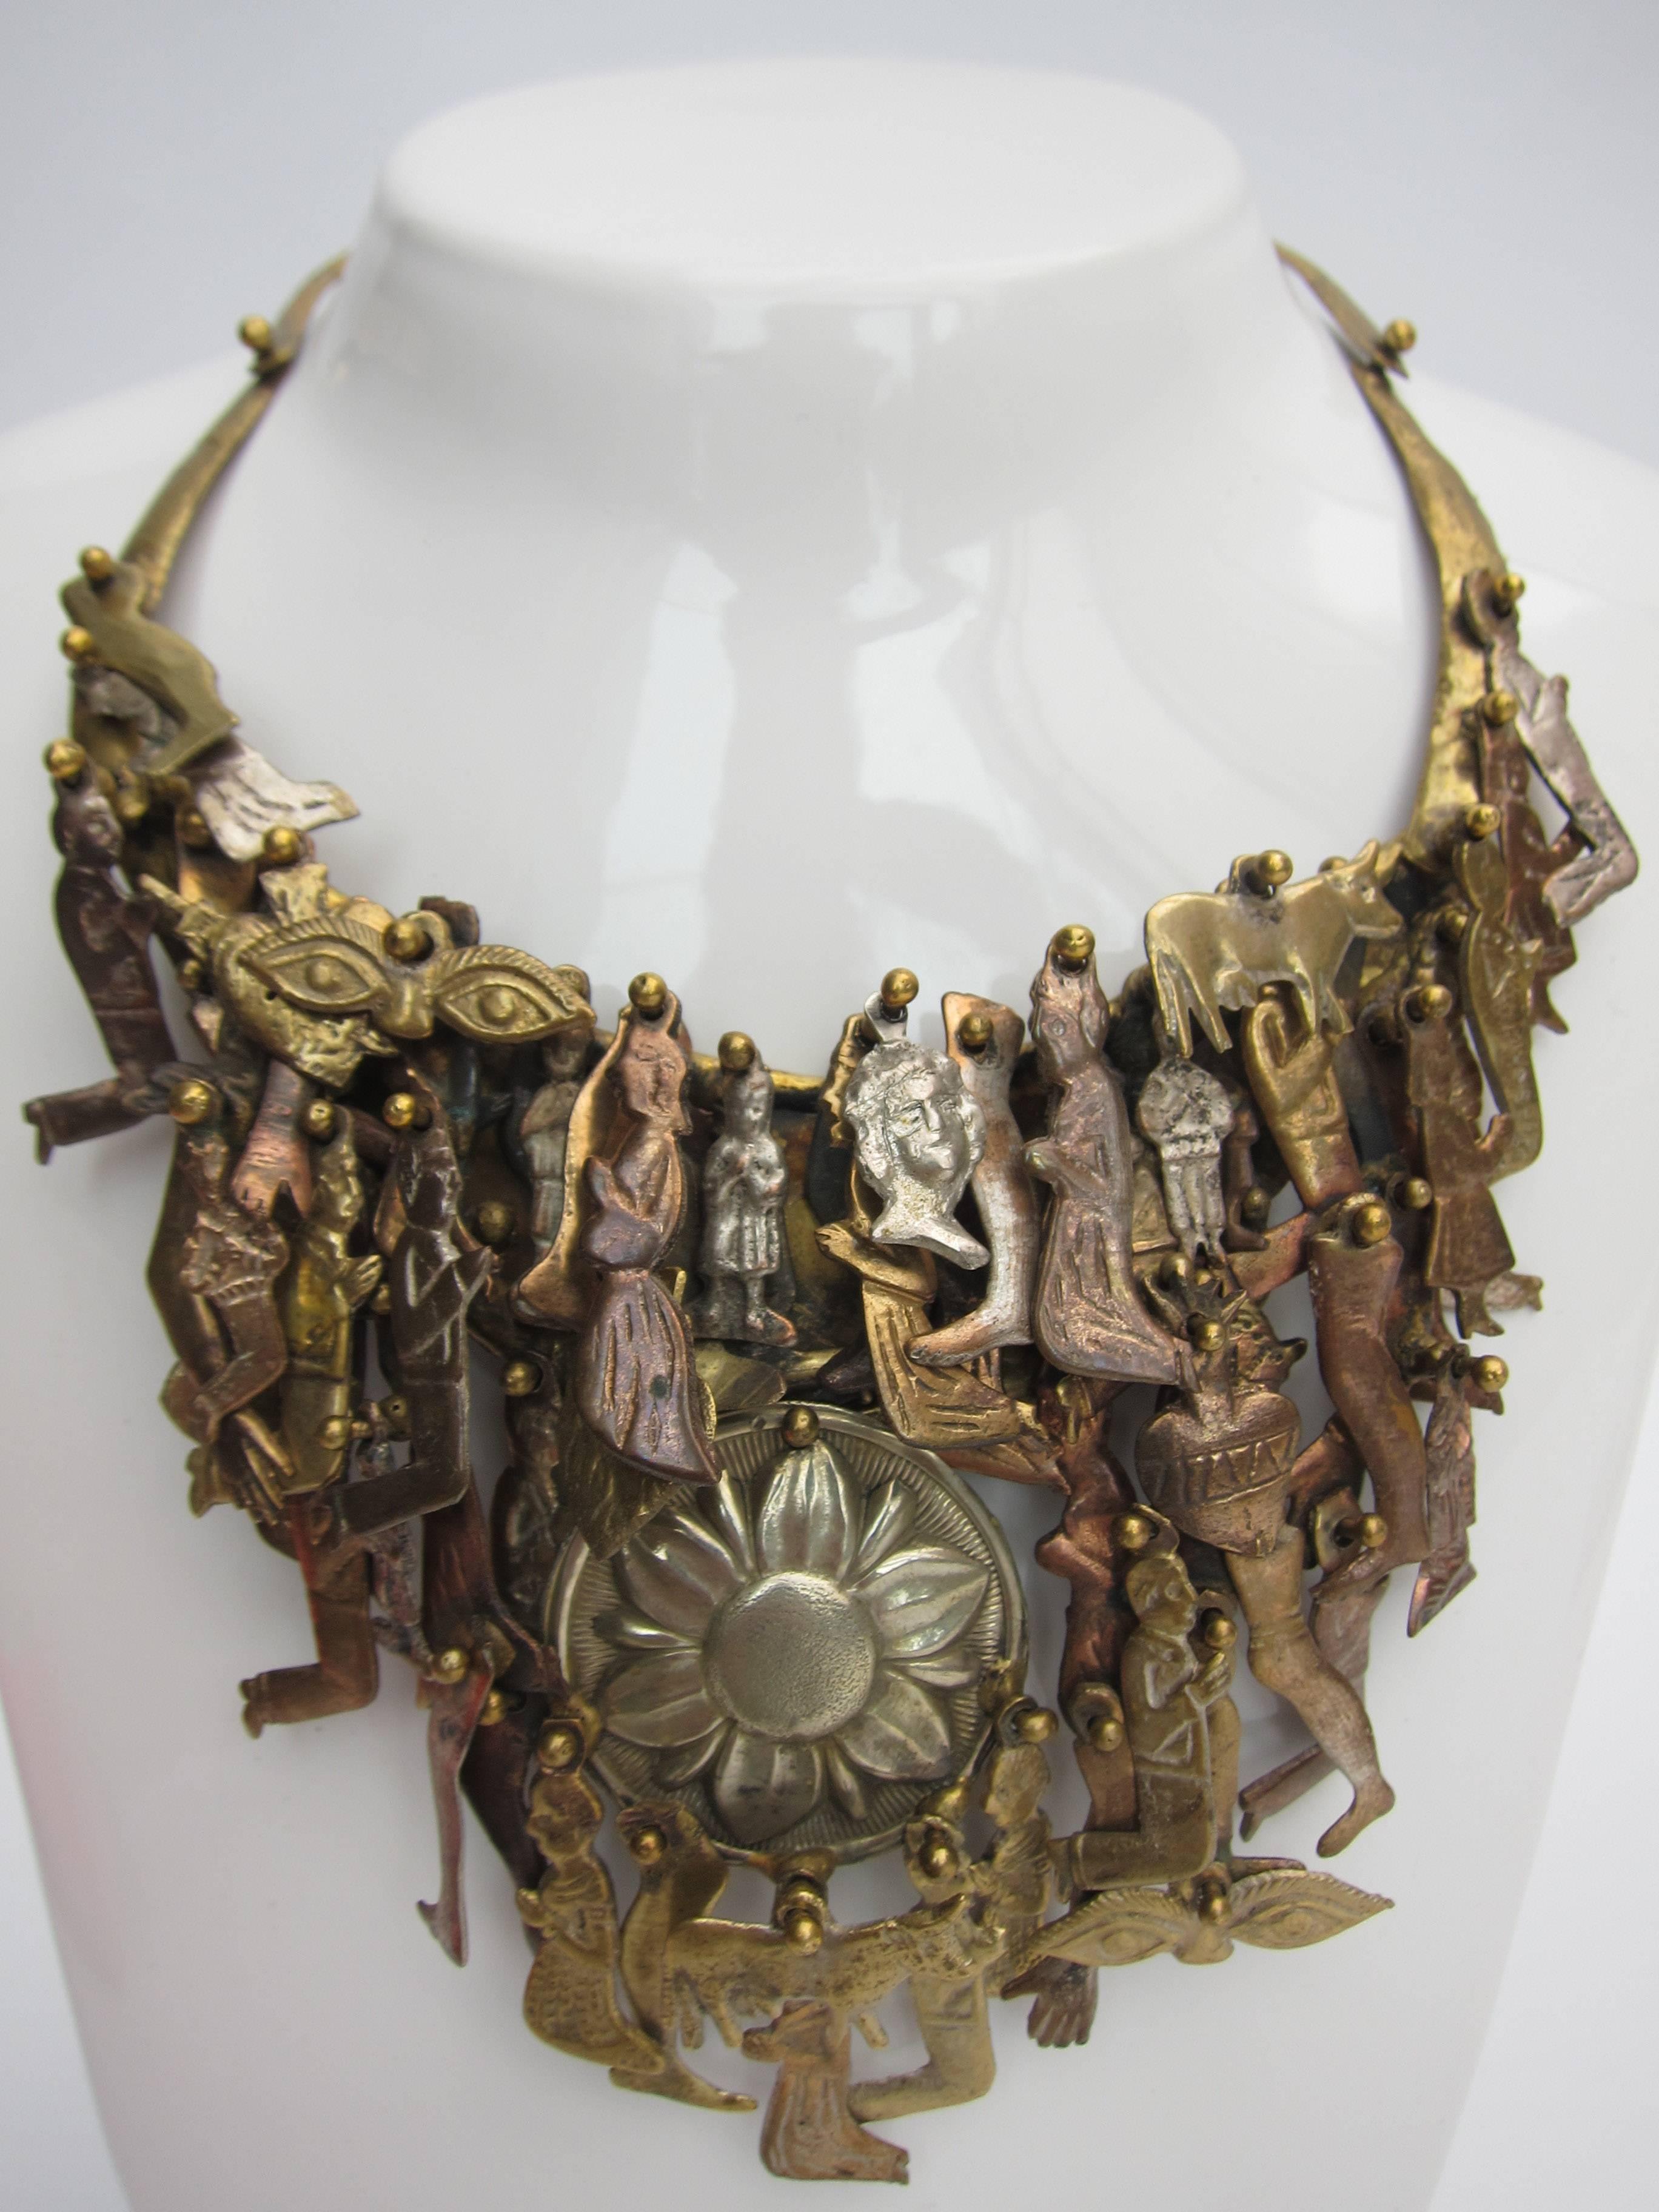 Pal Kepenyes emigrated to Acapulco in the 1960s from Hungary and his creations in jewelry and sculpture are fashioned from a blend of whimsy and skill. A true original whose designs have been credited with many awards, this particular necklace is